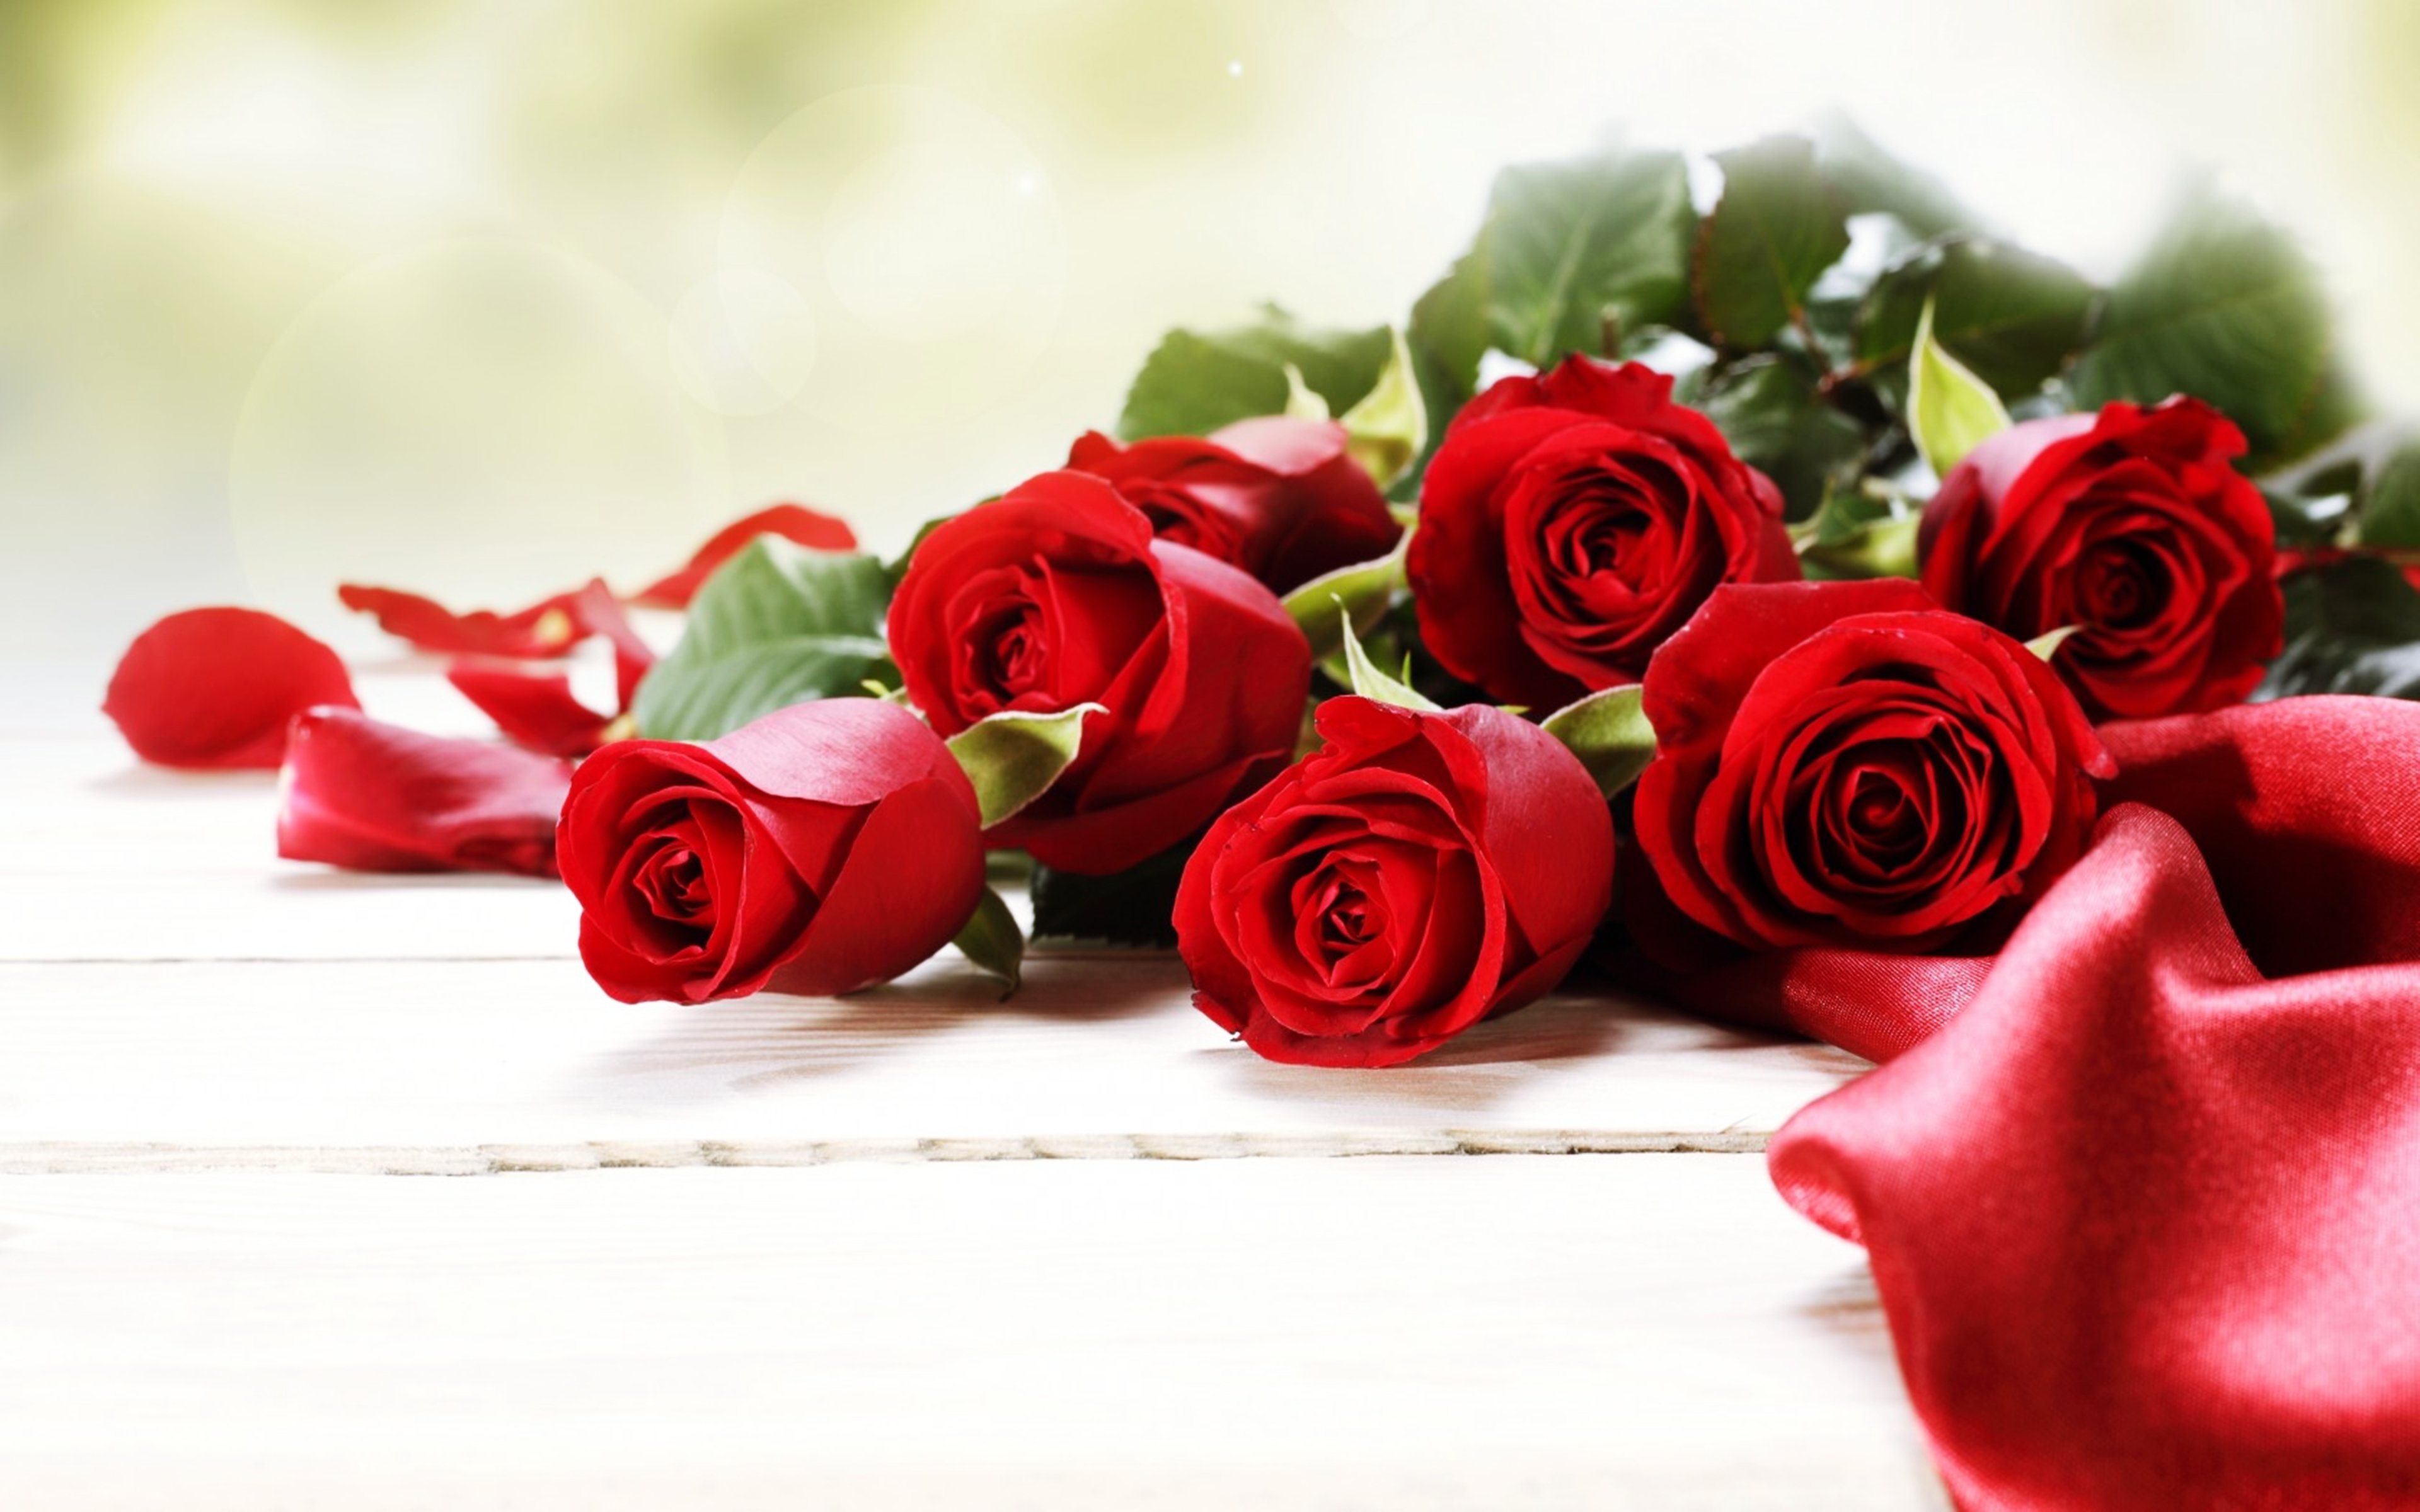 Roses Red Flowers Love Romance Emotions 4you Bouquet Spring Wallpapers Hd Desktop And